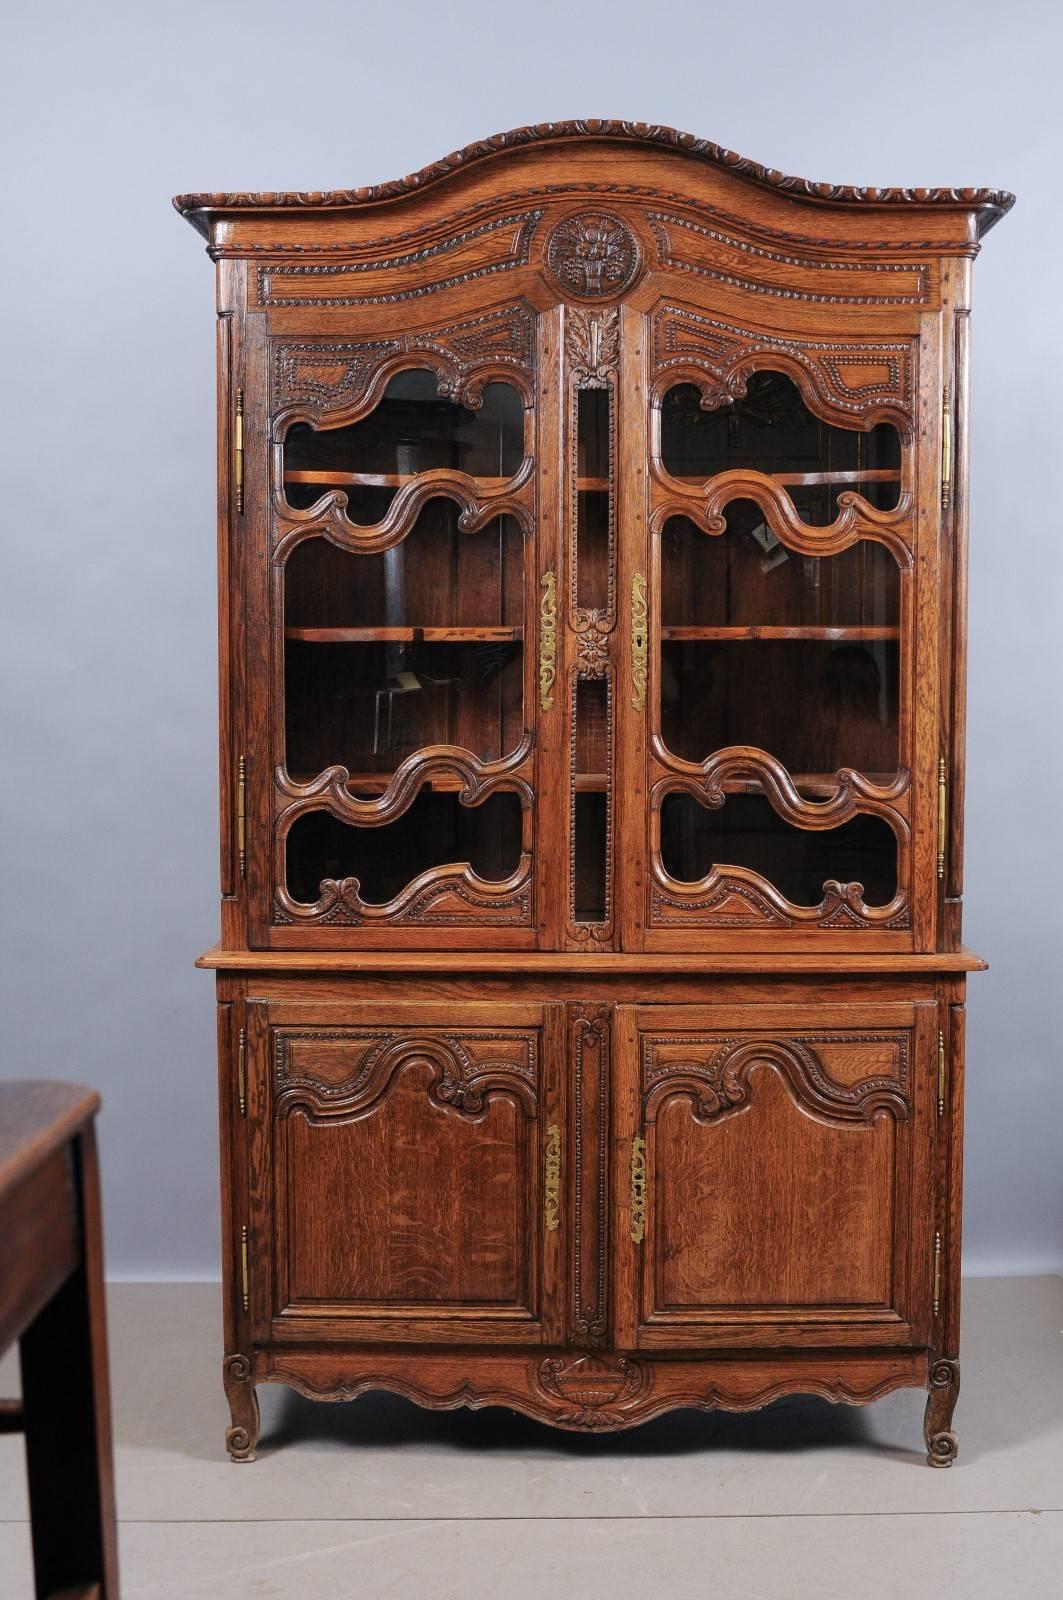 French Louis XV/XVI oak buffet deux corps/vitrine with carved arched cornice, glazed doors, shaped apron with urn carving detail and all resting on cabriole feet.